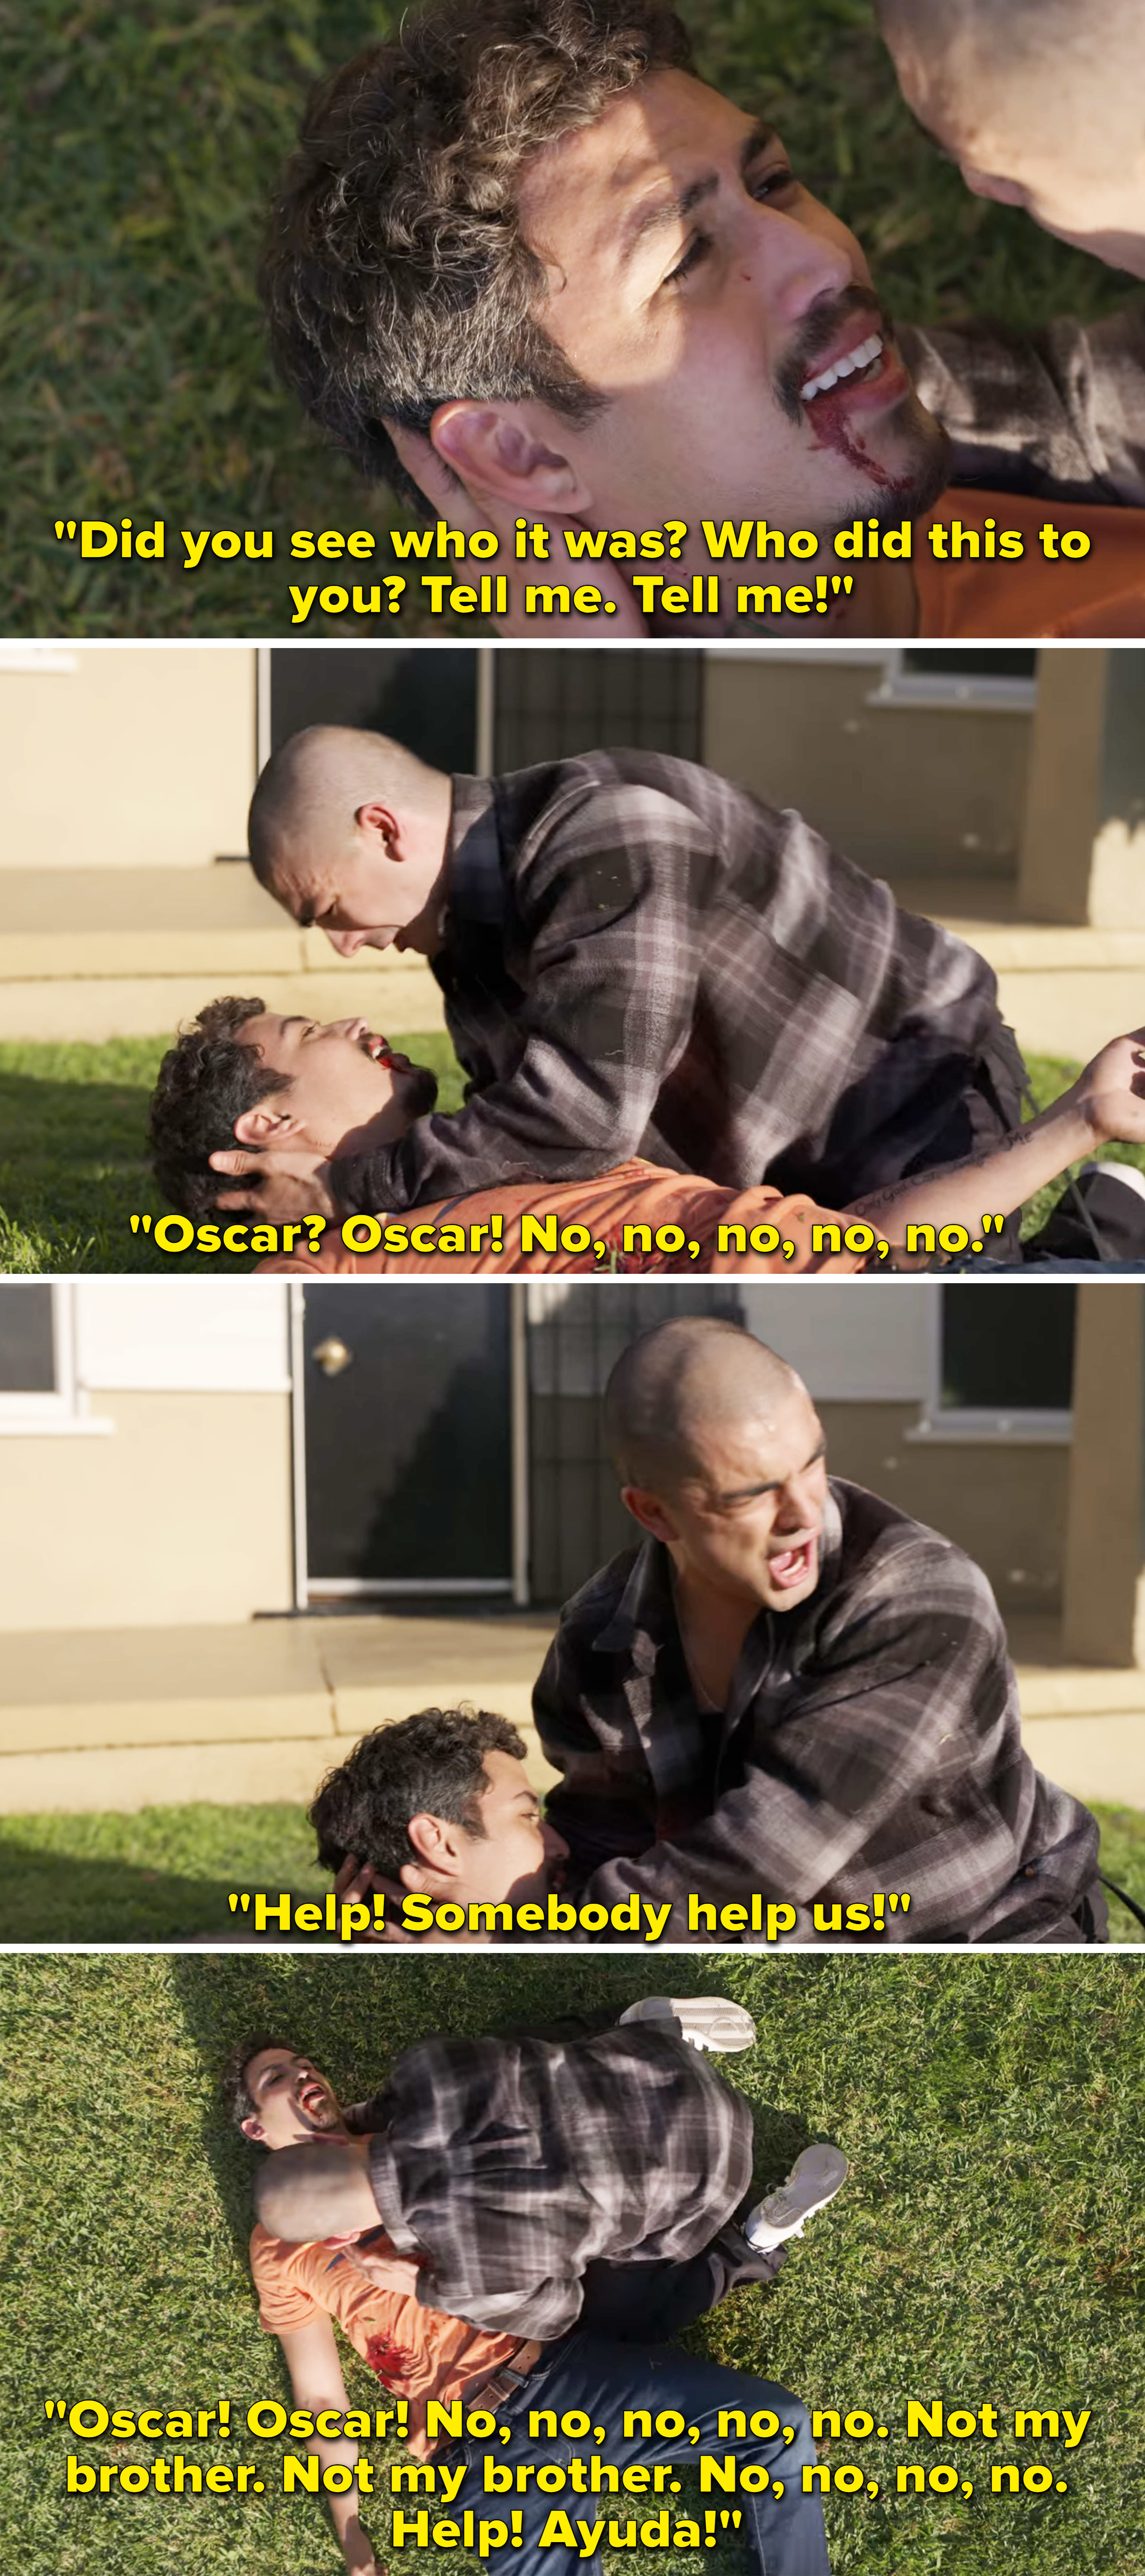 Oscar gets shot and someone cries for help